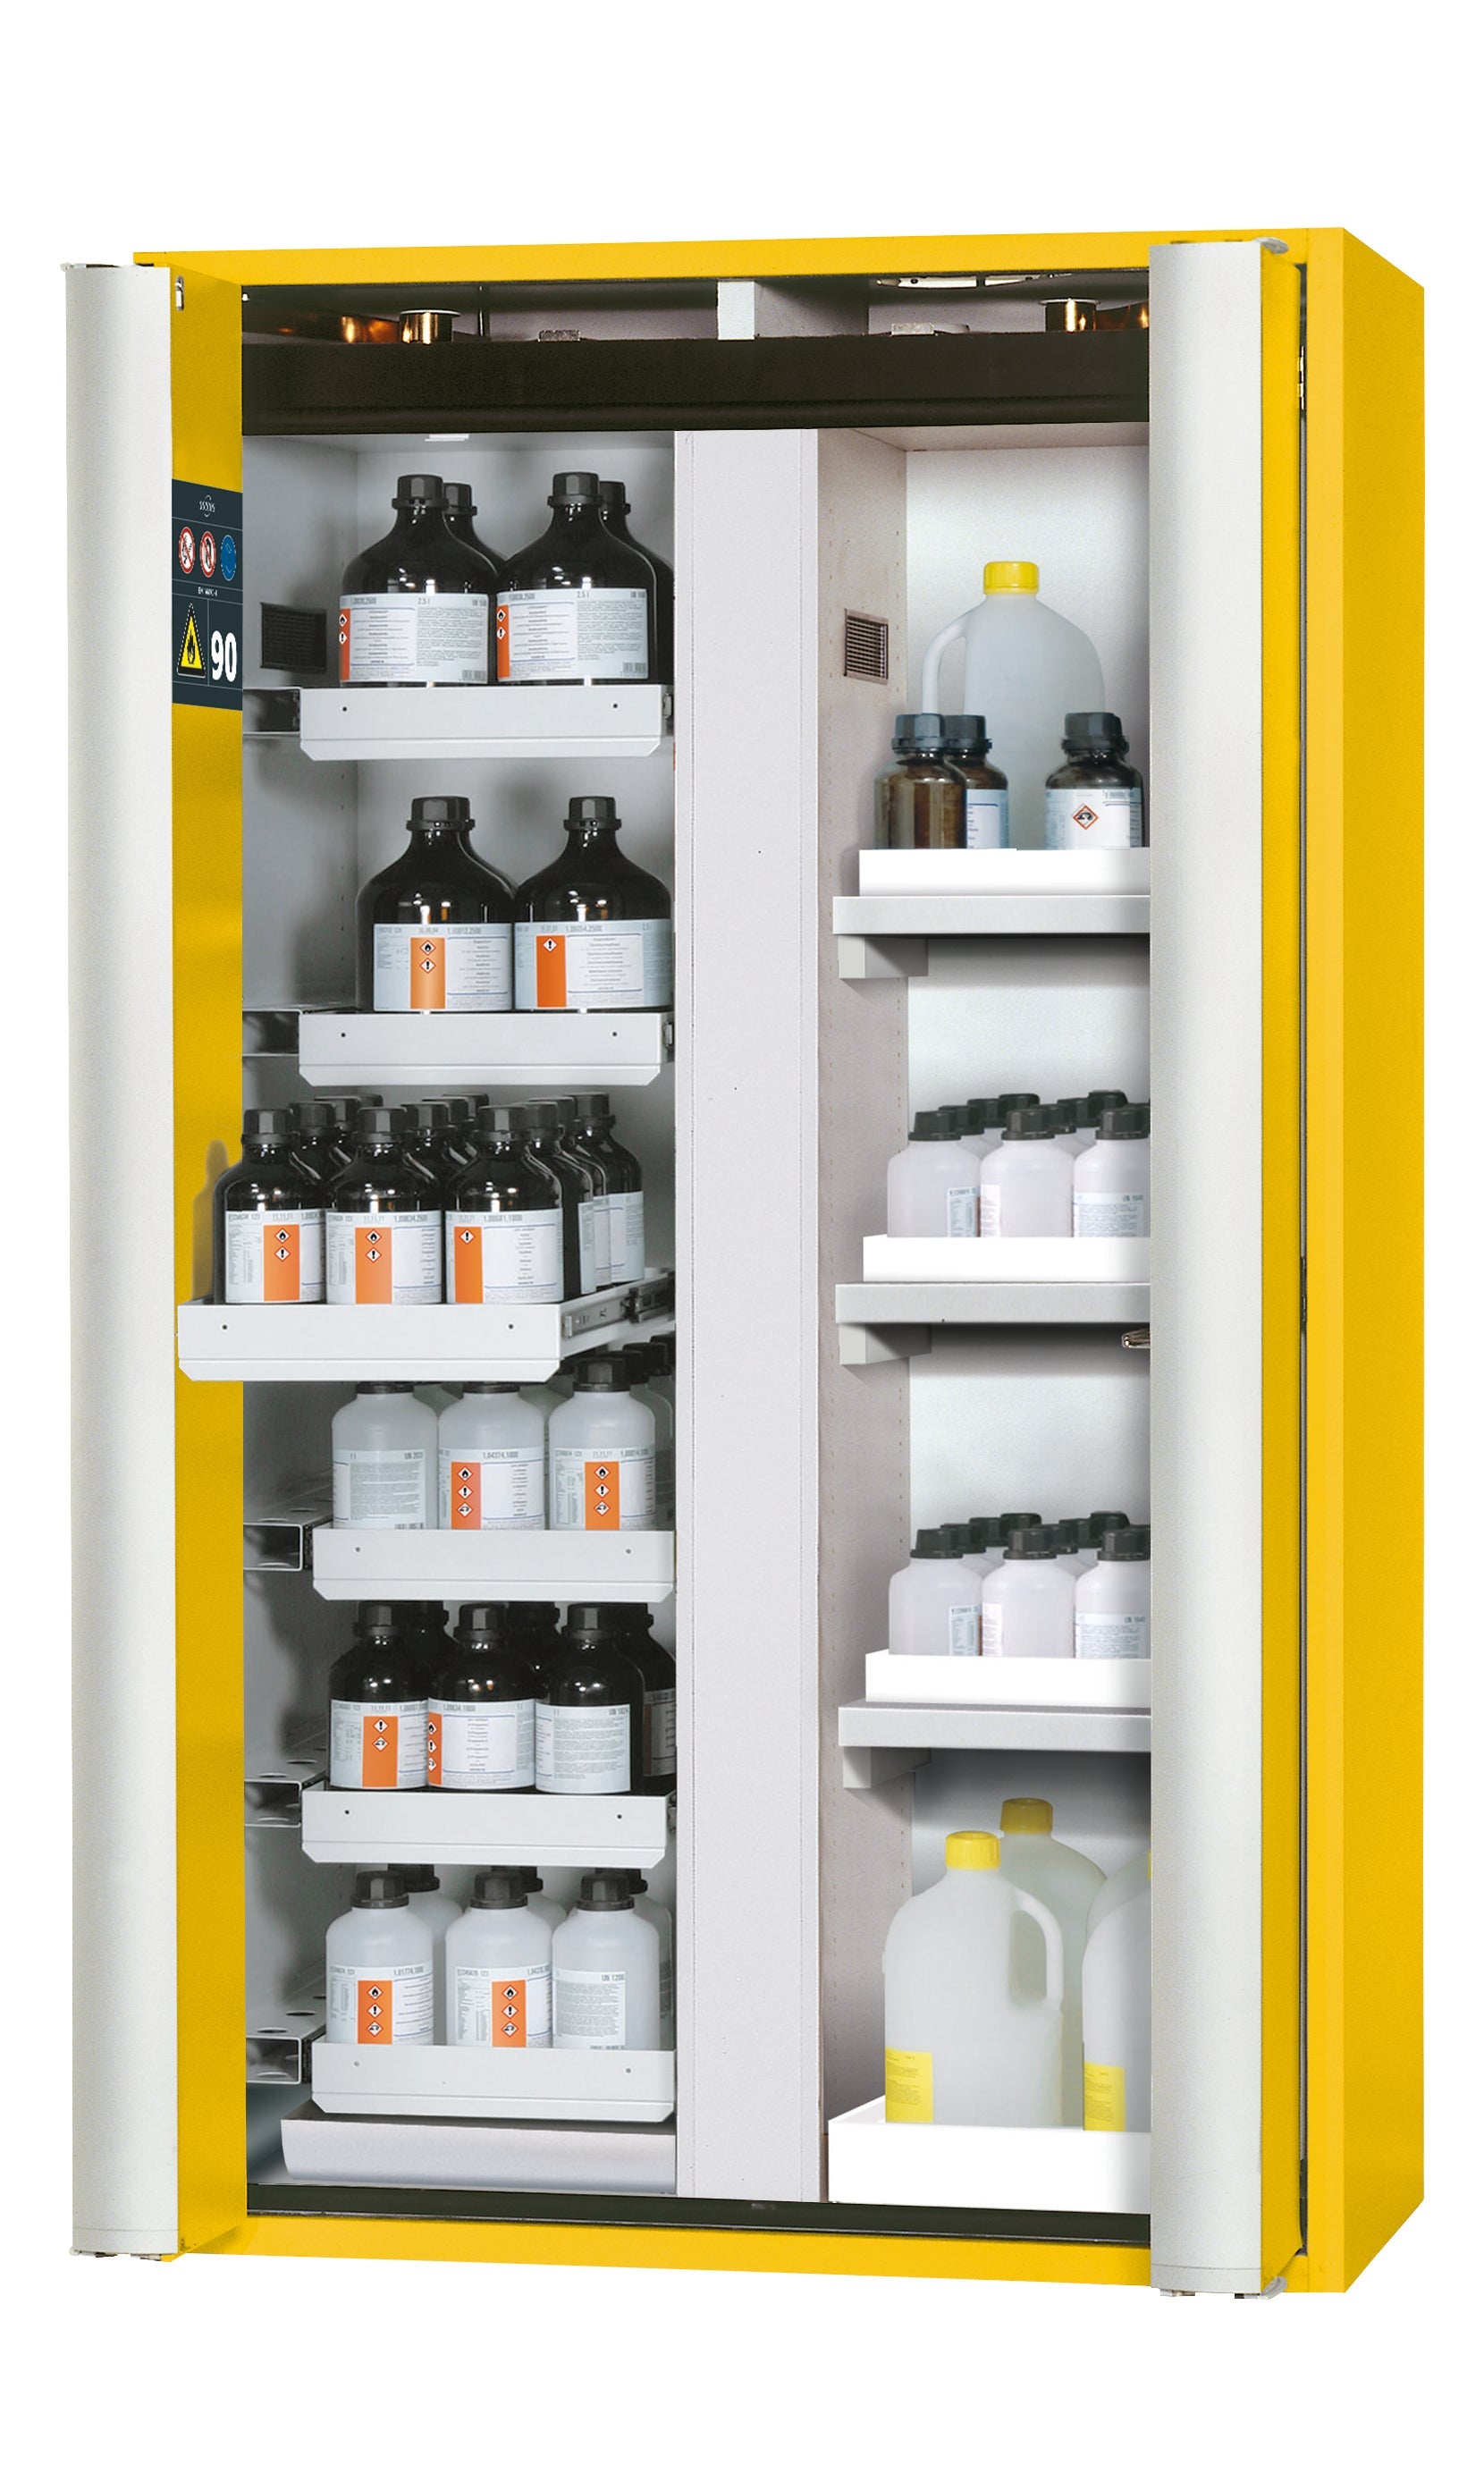 Type 90 safety cabinet S-PHOENIX-90 model S90.196.120.MV.FDAS in safety yellow RAL 1004 with 6x standard pull-out tray (sheet steel)